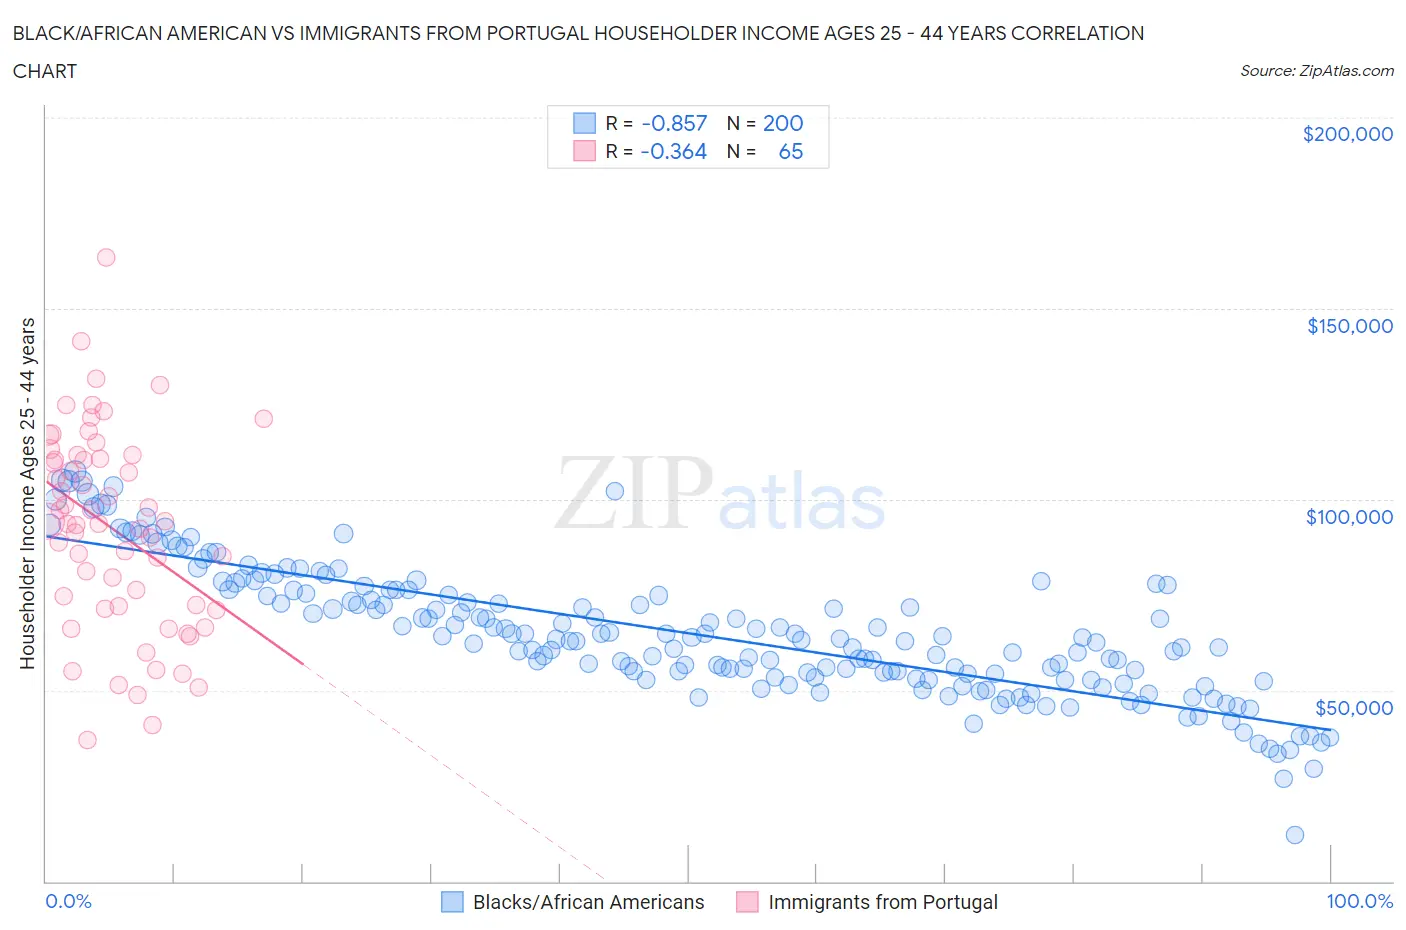 Black/African American vs Immigrants from Portugal Householder Income Ages 25 - 44 years